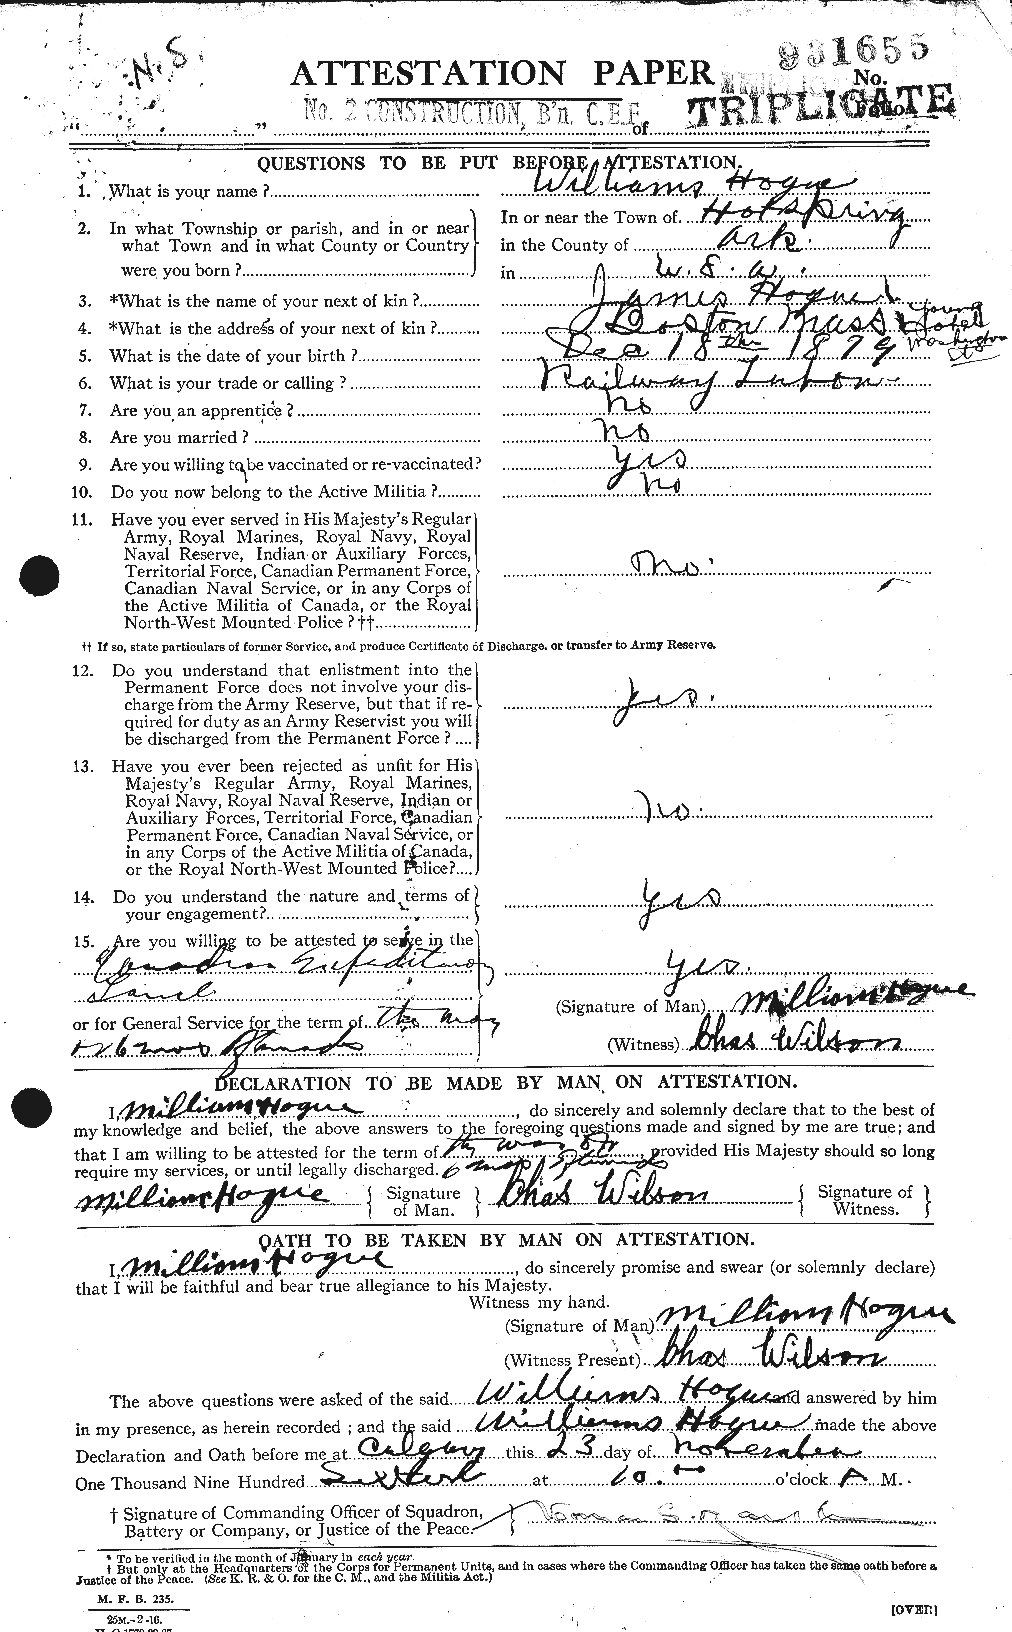 Personnel Records of the First World War - CEF 396538a